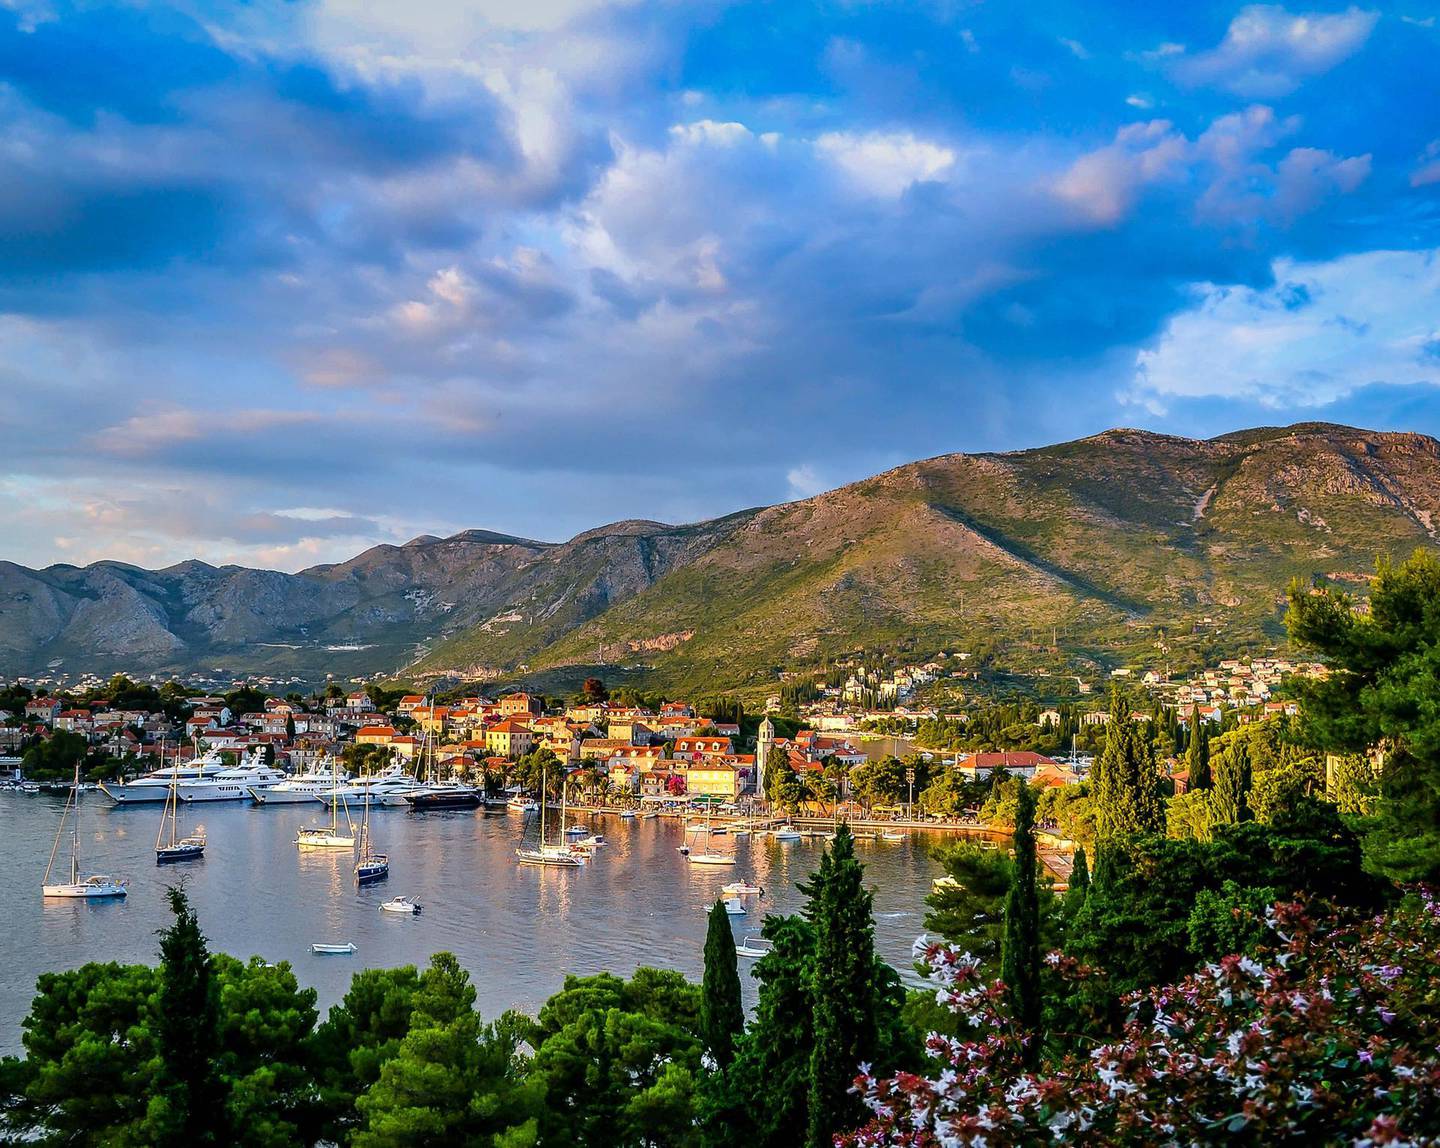 Croatia is a good summer holiday option for onward travel to the UK. Conor Rees / Unsplash